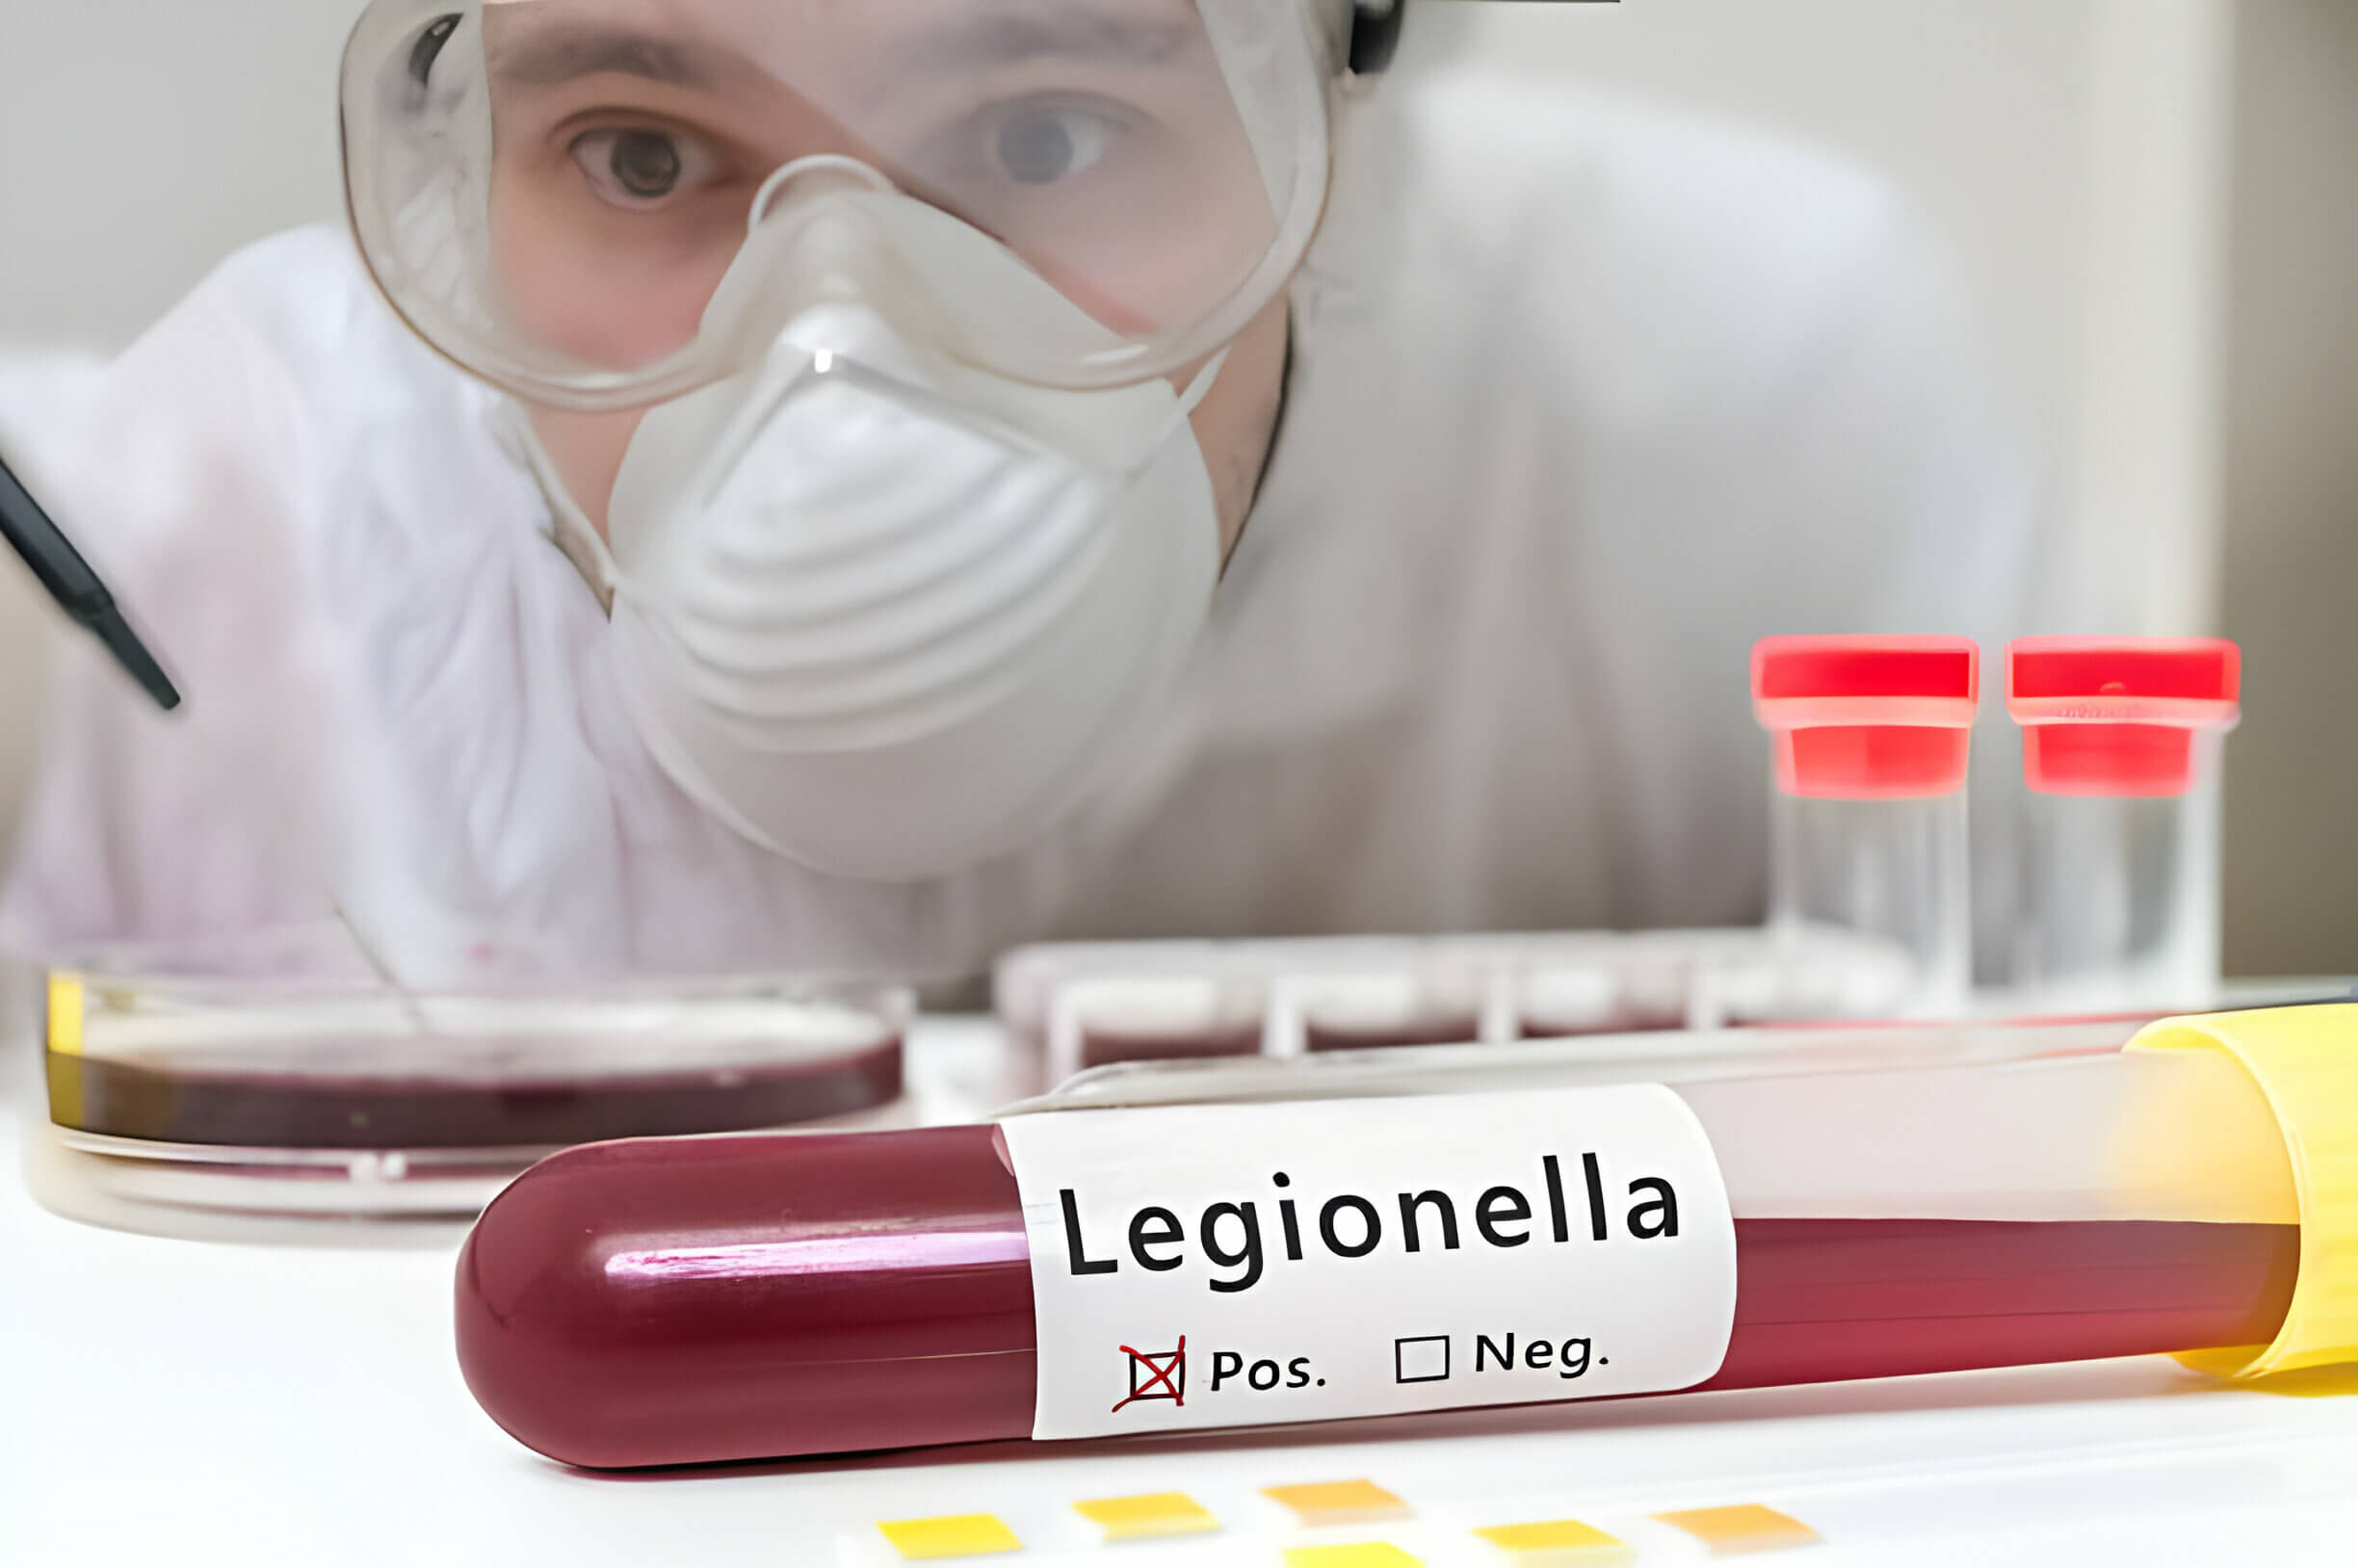 Researcher is analyzing Legionella in test tube with blood.